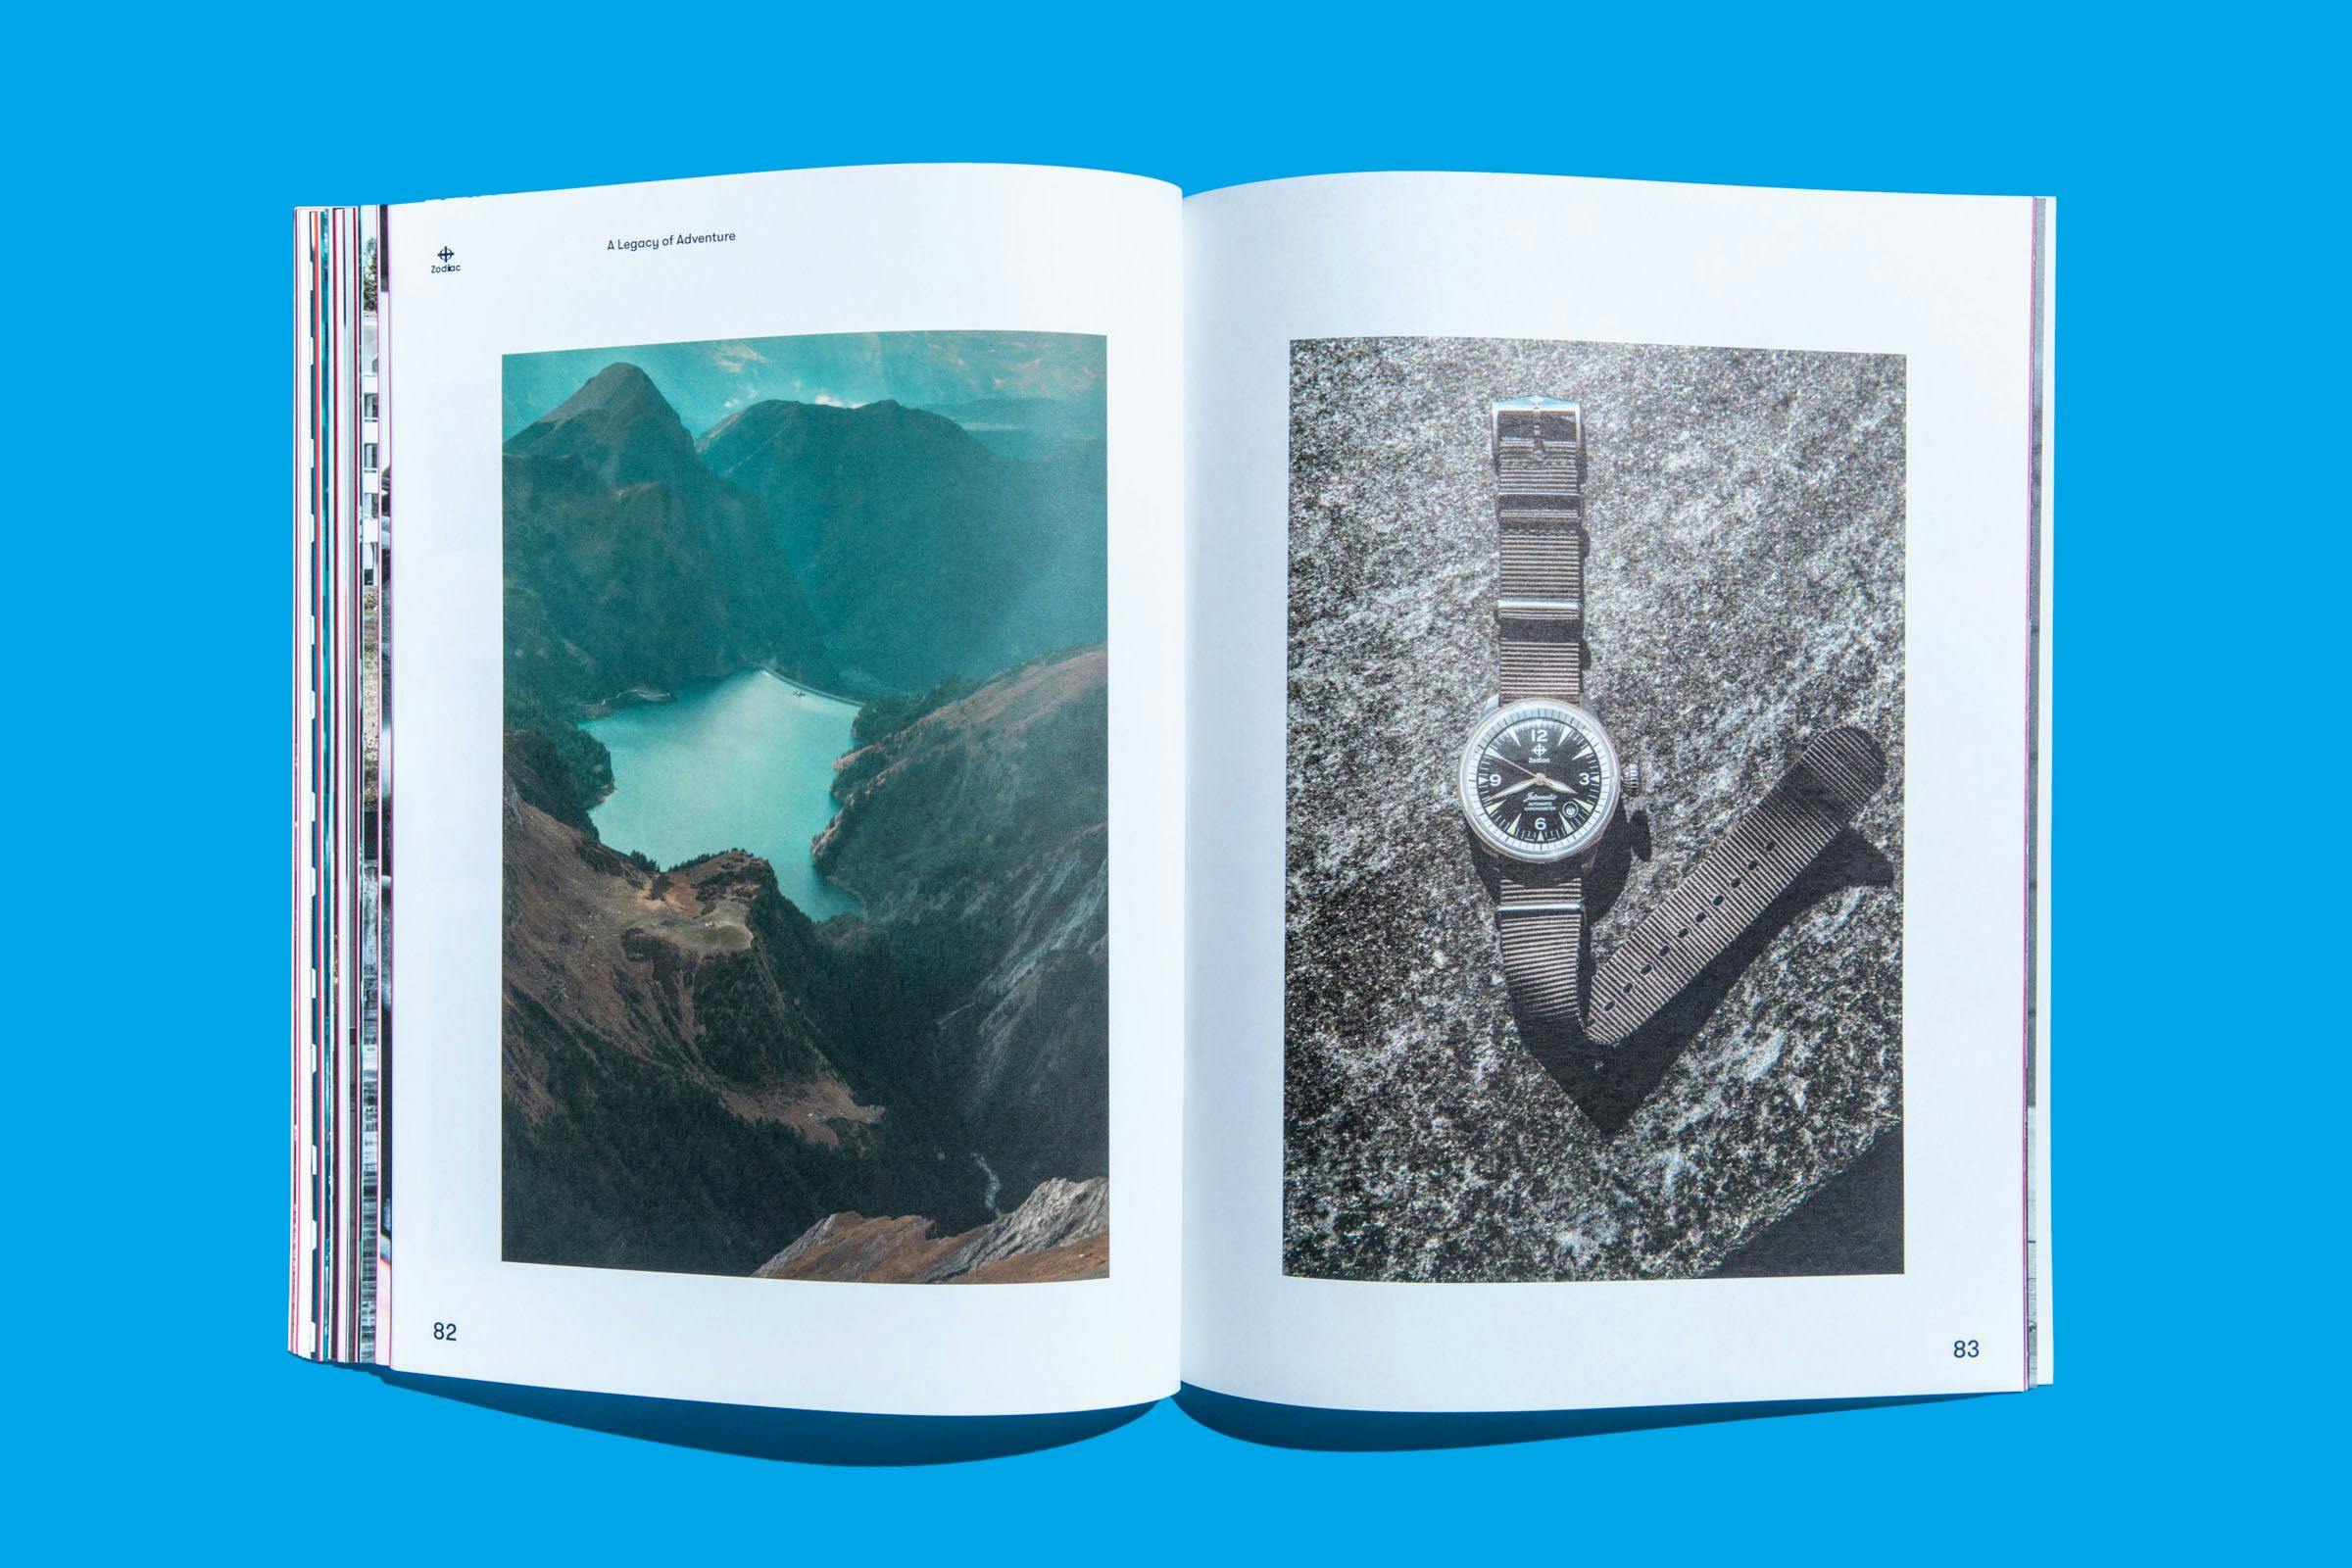 Pages from the Zodiac Watches: Brand Book with photos of mountains and a Zodiac Watch